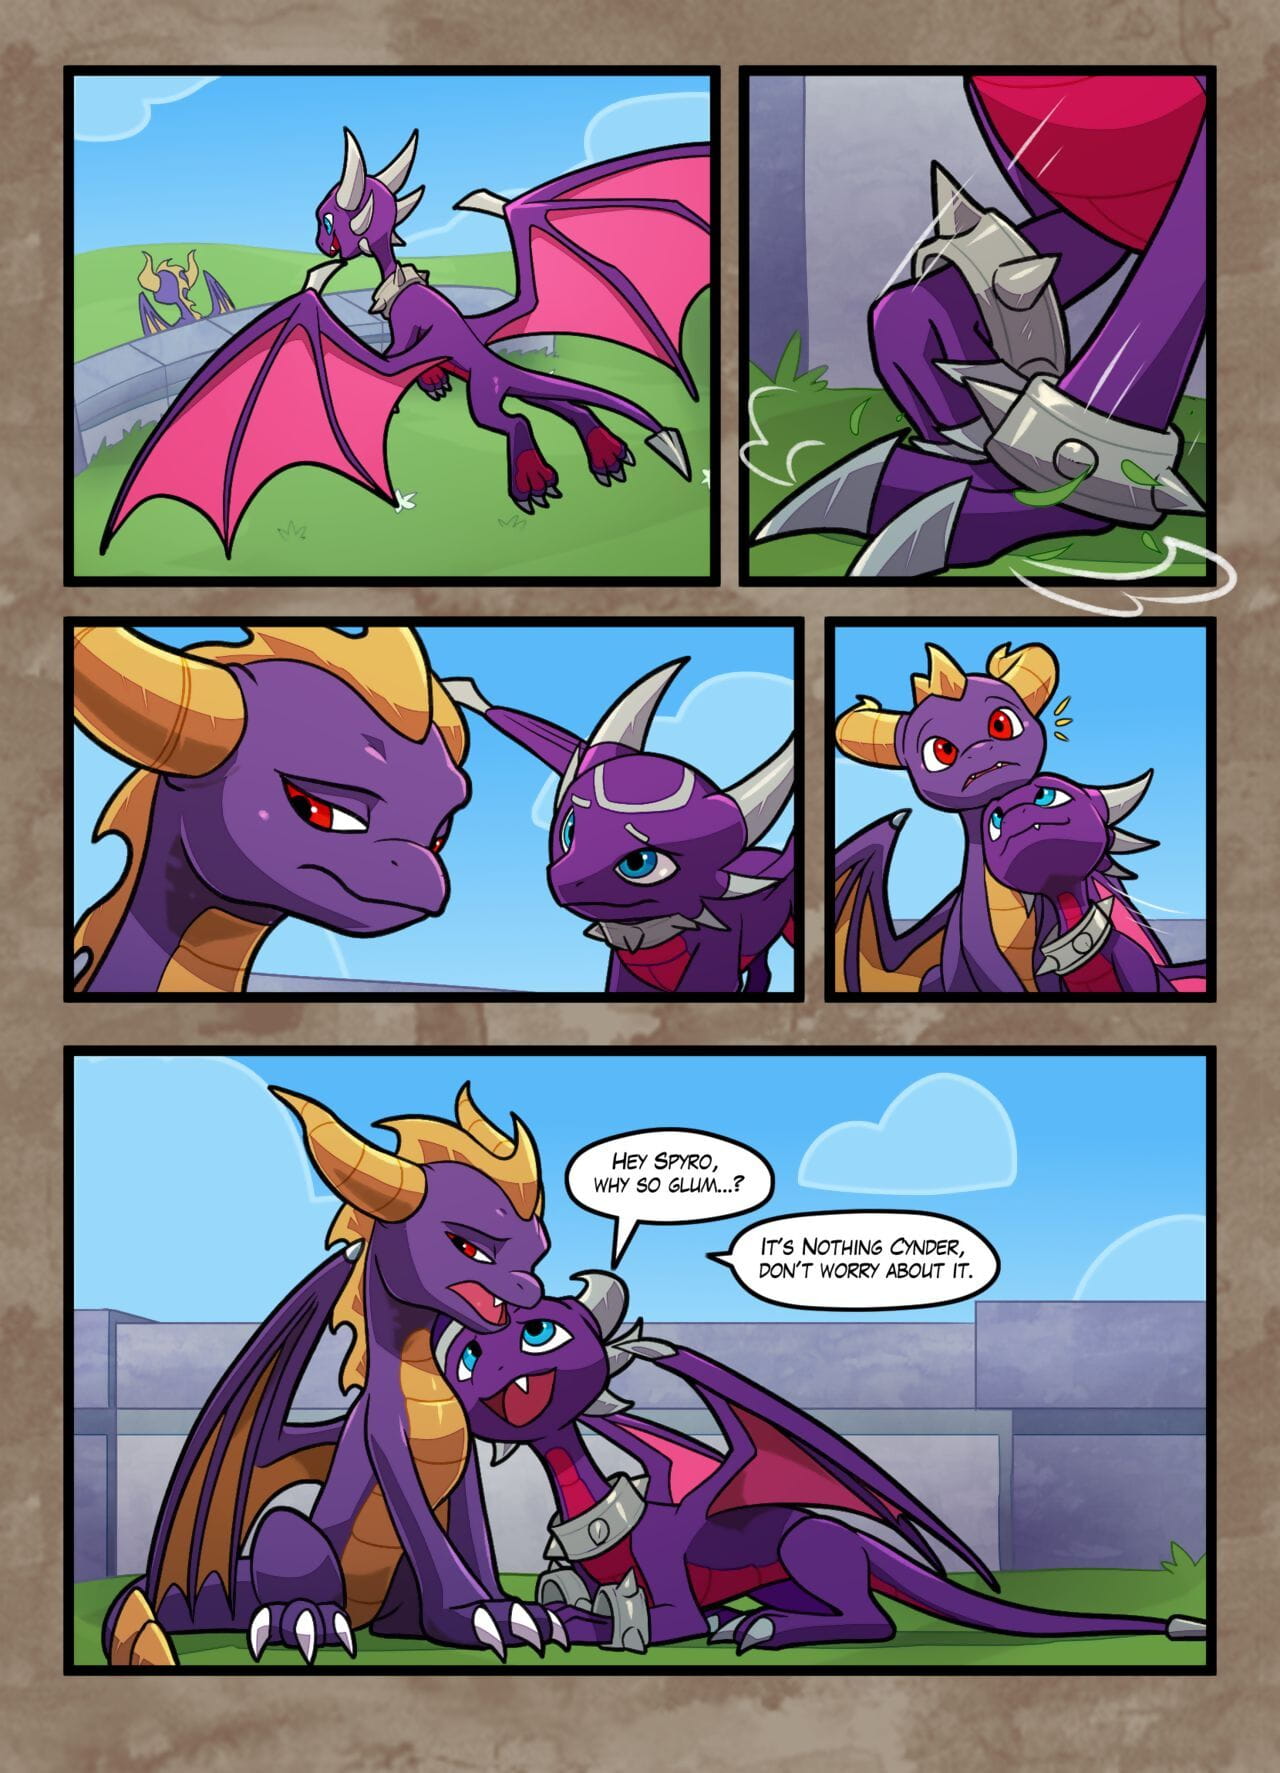 Blitzdrachin A Band together Forth Christen Spyro chum around with annoy Hideousness